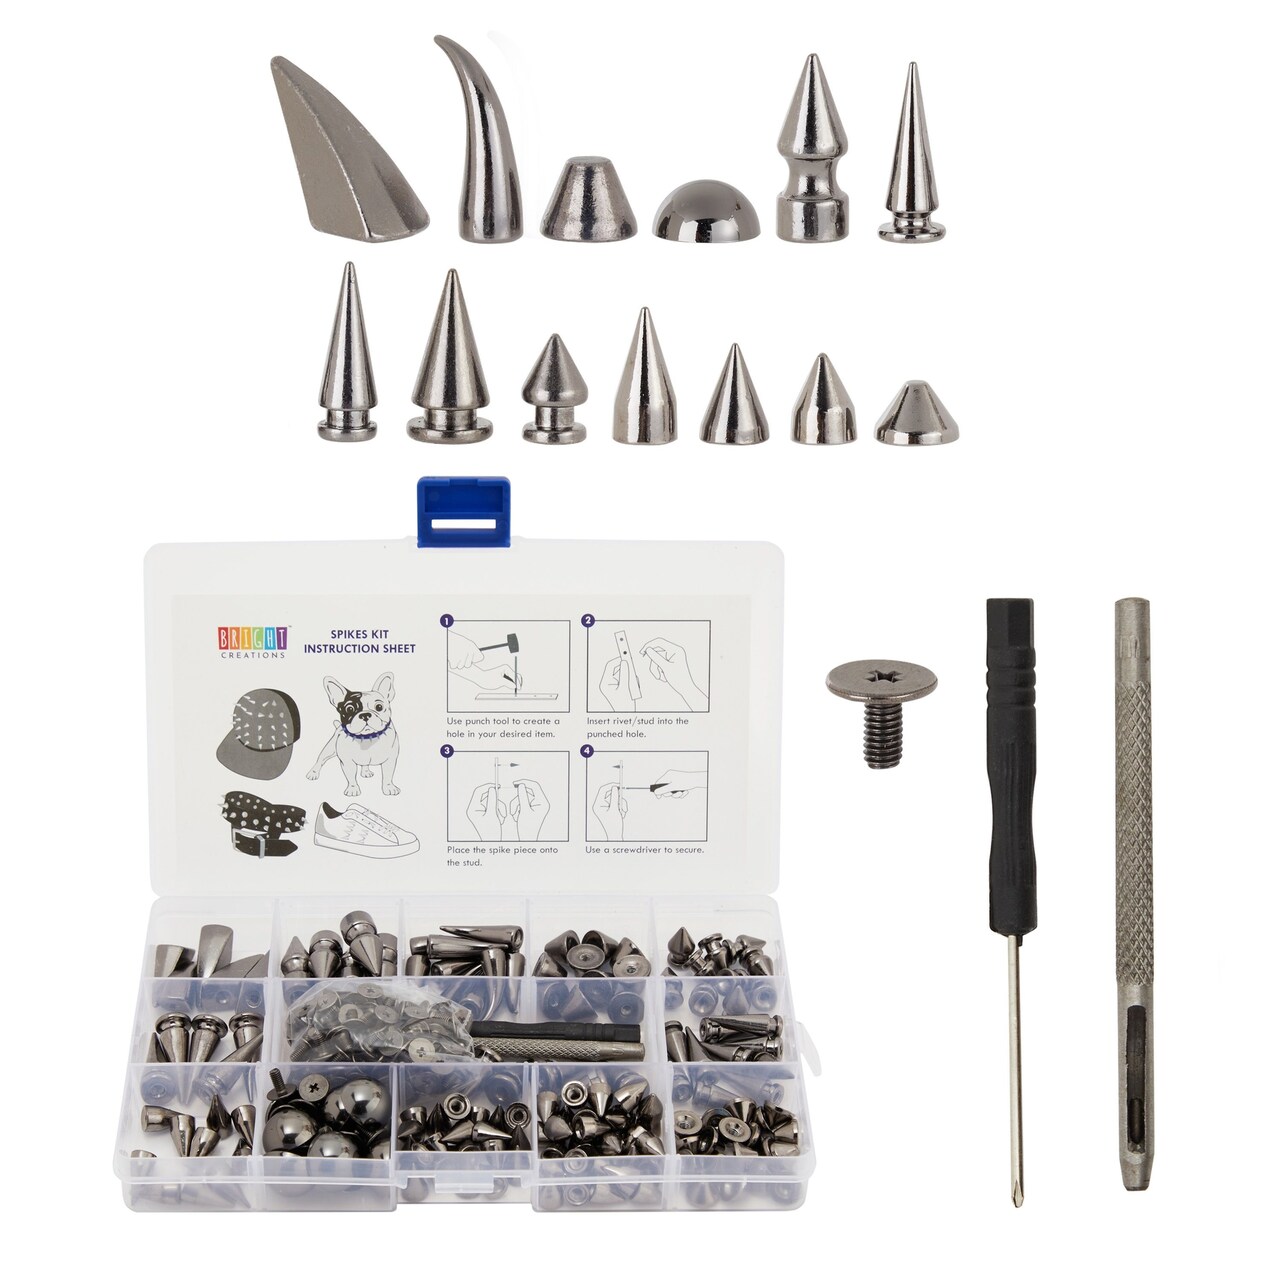 150-Piece Gunmetal Gray Spikes and Studs Set, 13 Assorted Shapes with  Screws, Phillips Screwdriver, Hole Punch Tool, and Plastic Storage Case for